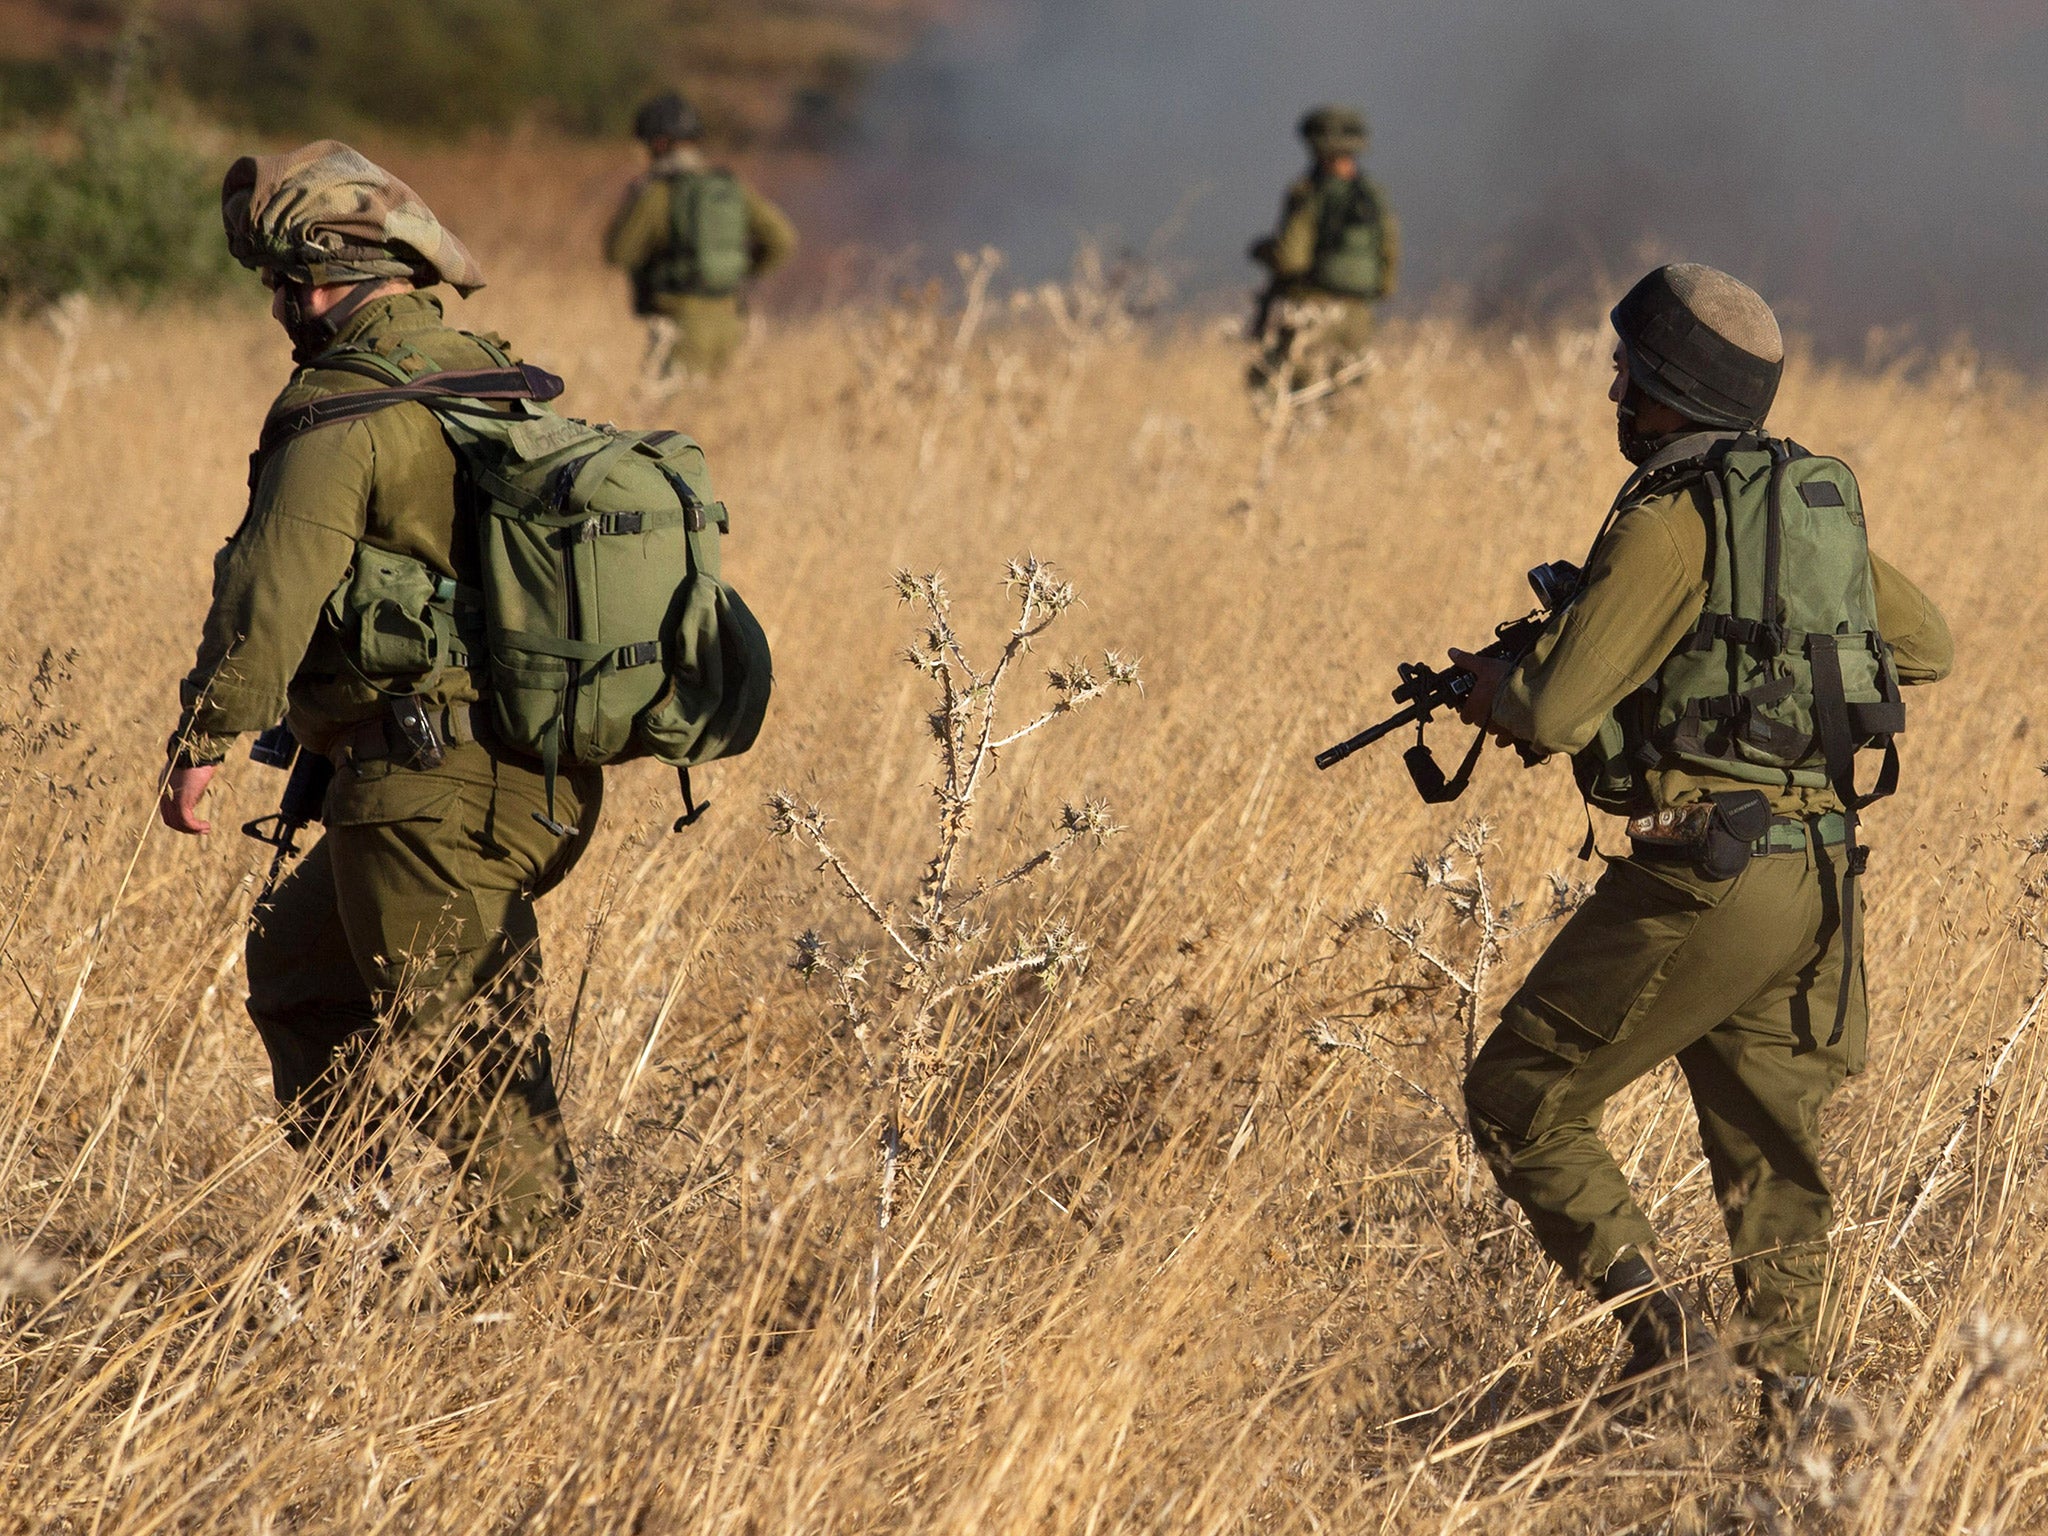 A faulty app led the Israeli soldiers to a volatile refugee camp. File photo